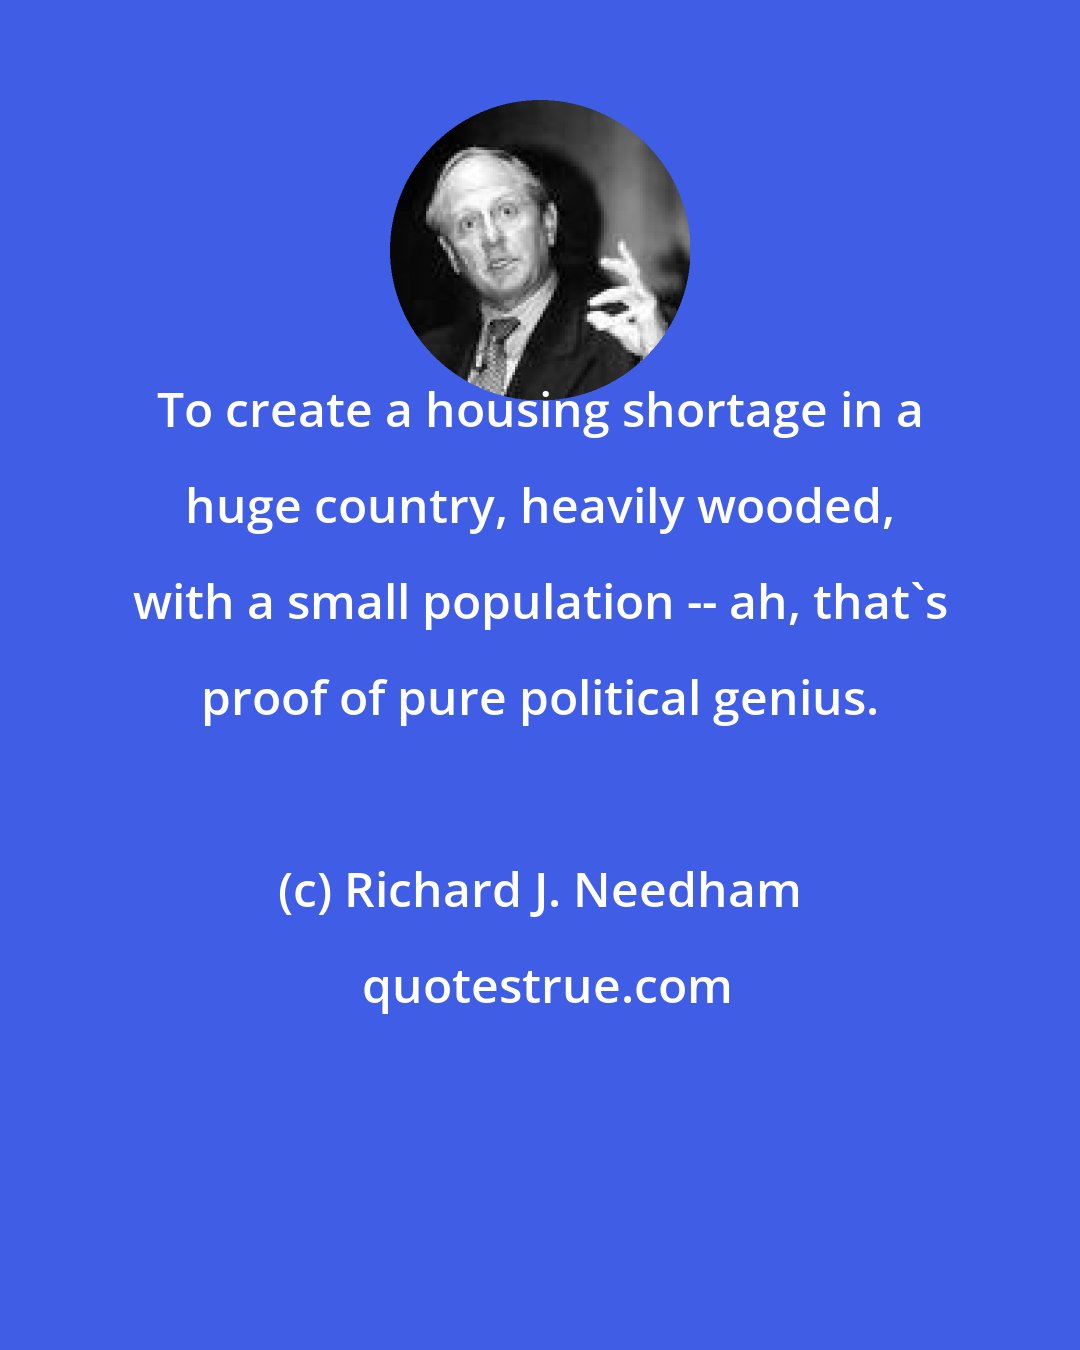 Richard J. Needham: To create a housing shortage in a huge country, heavily wooded, with a small population -- ah, that's proof of pure political genius.